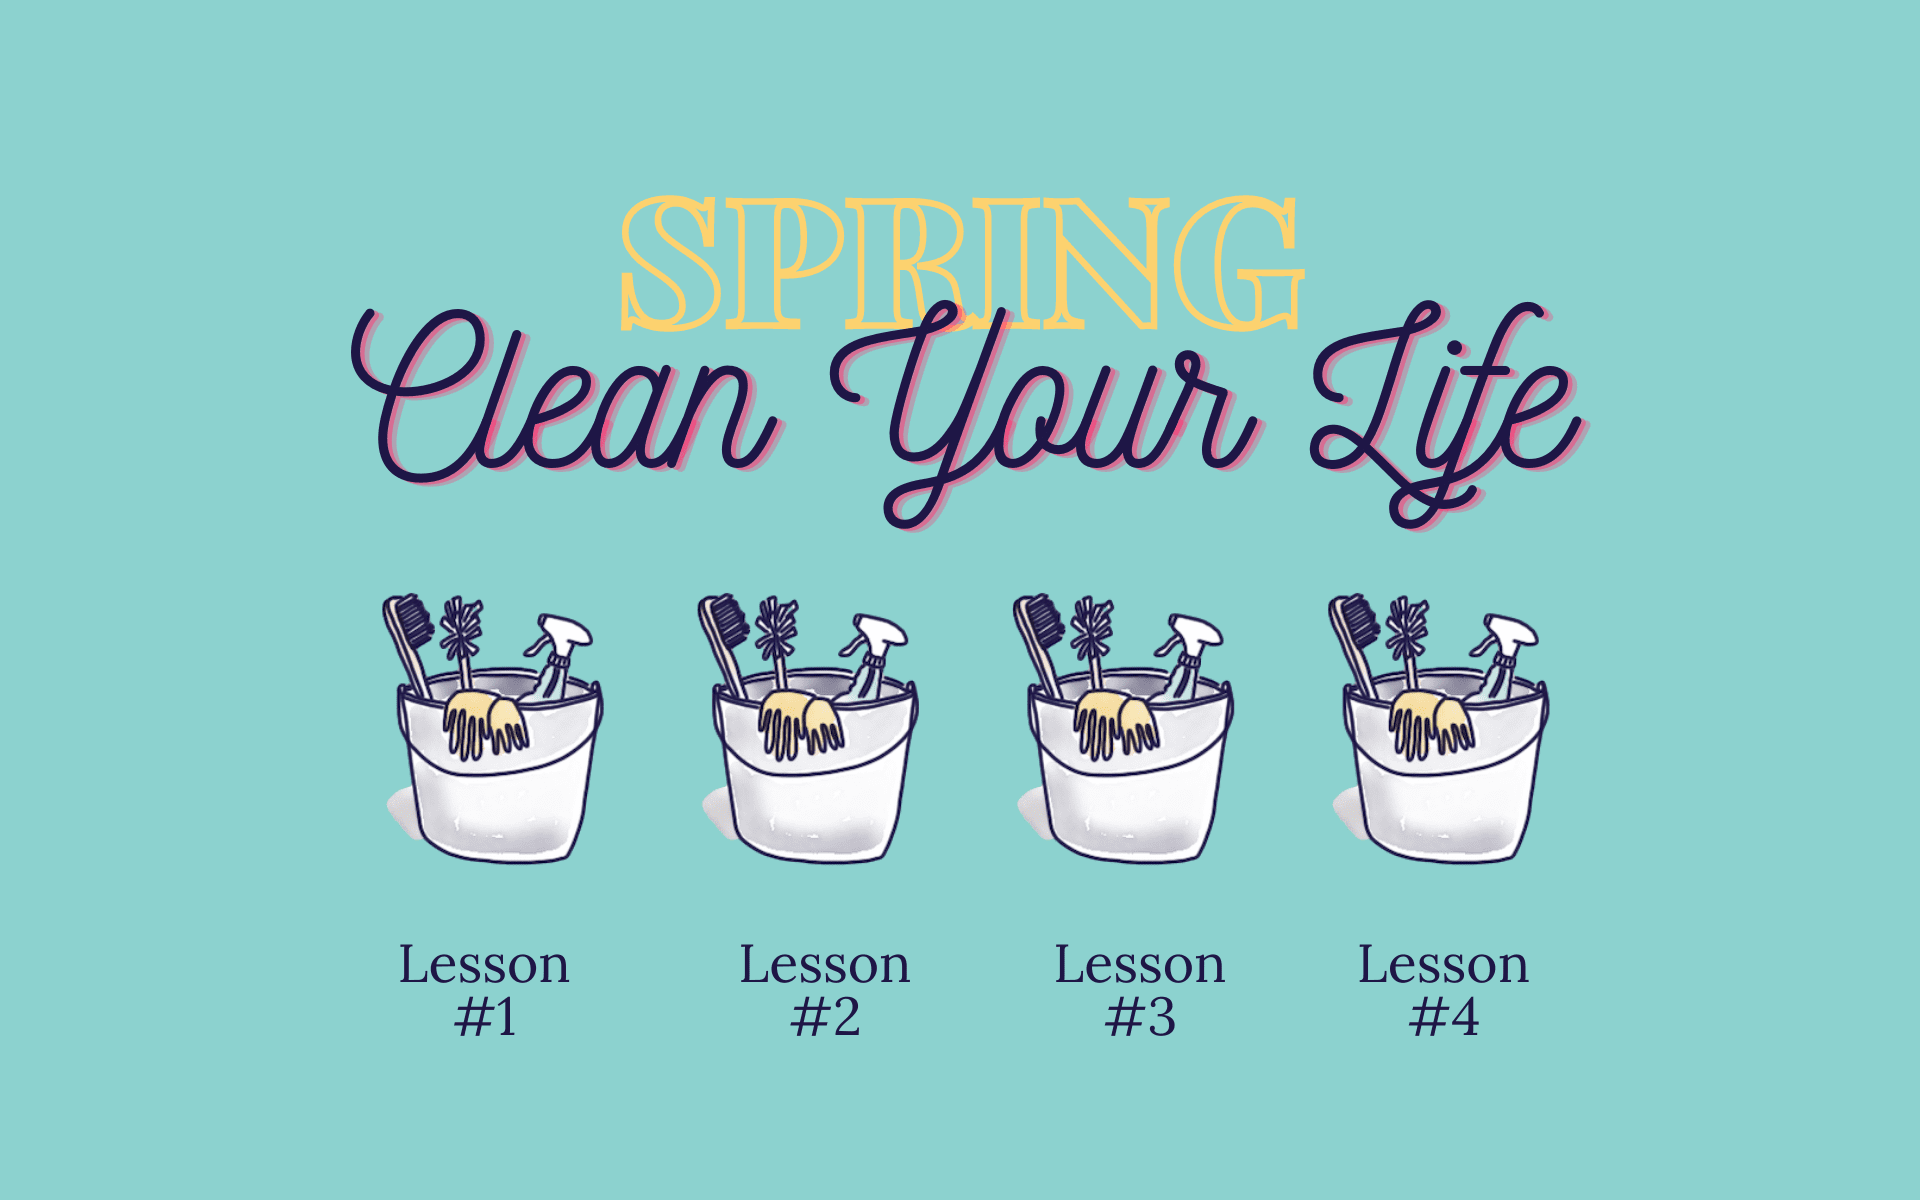 4 Lessons for Spring Cleaning Your Life